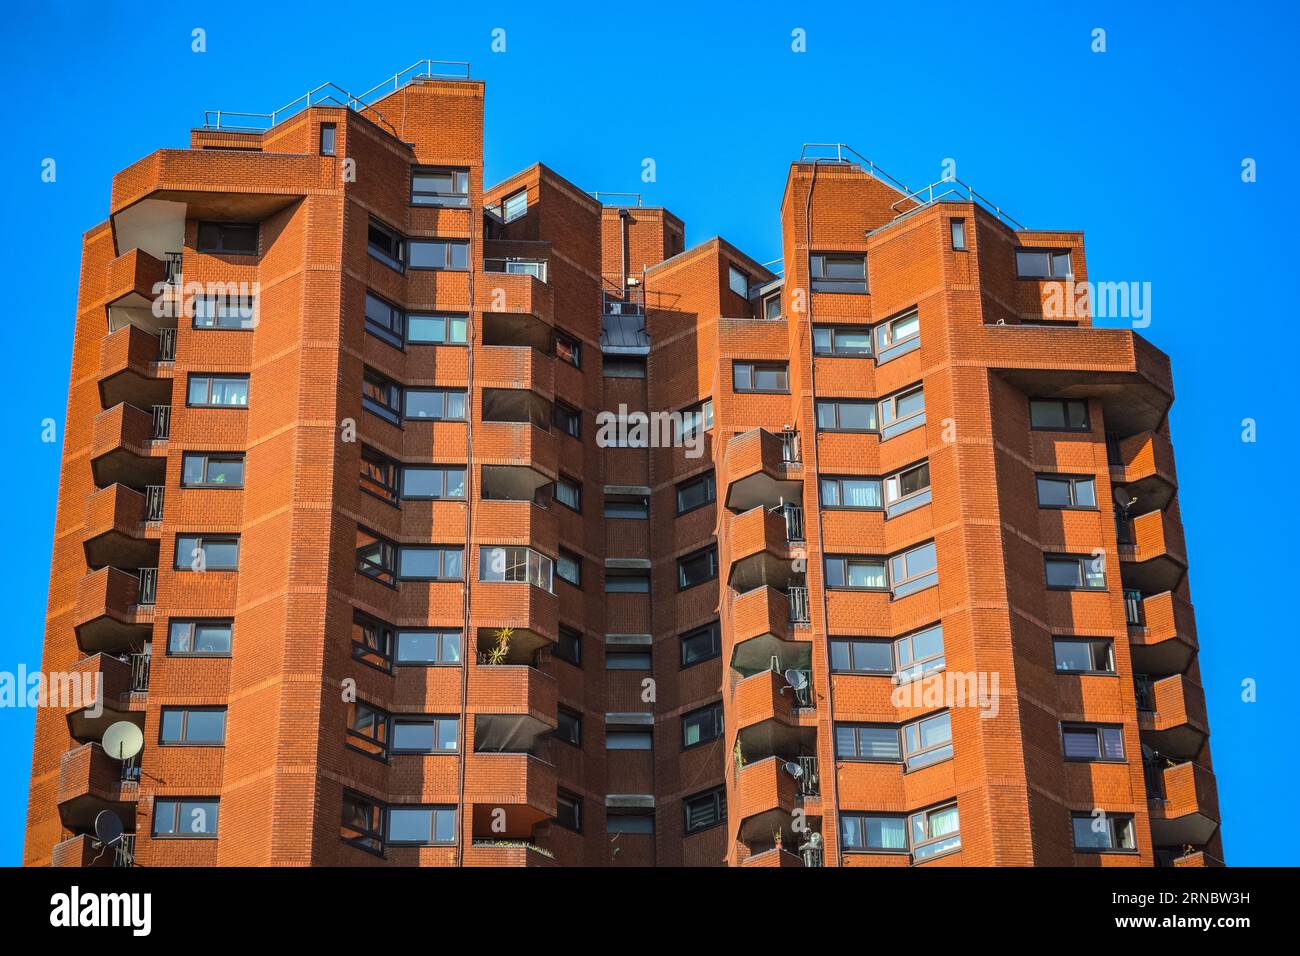 Brutalist architecture, part of the World's End estate in Chelsea, London Stock Photo